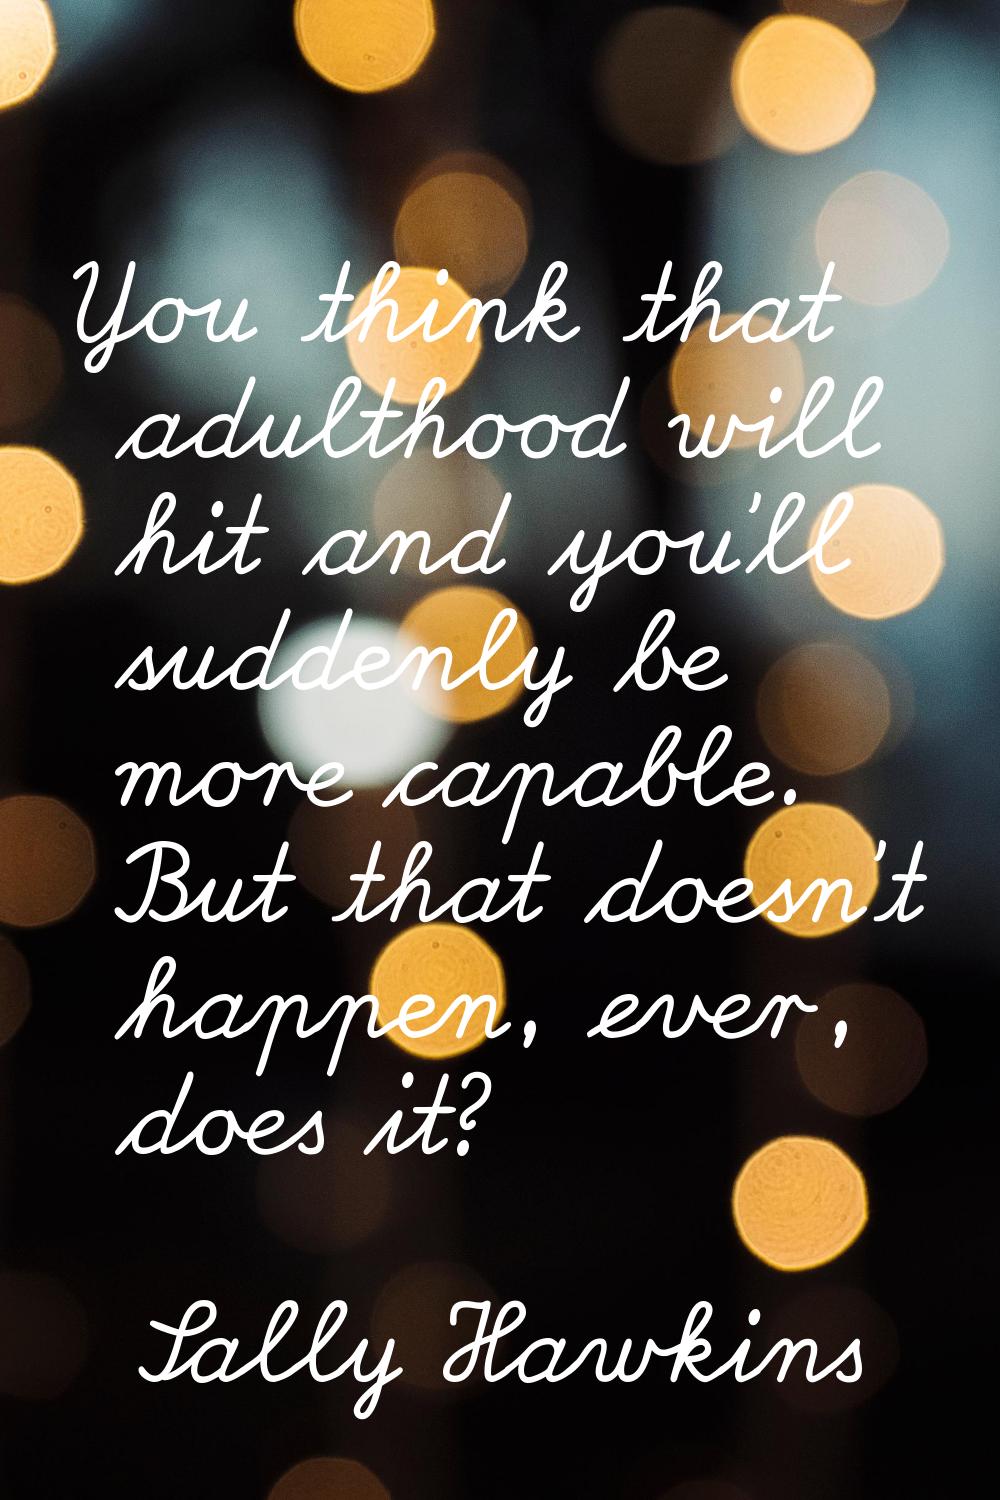 You think that adulthood will hit and you'll suddenly be more capable. But that doesn't happen, eve